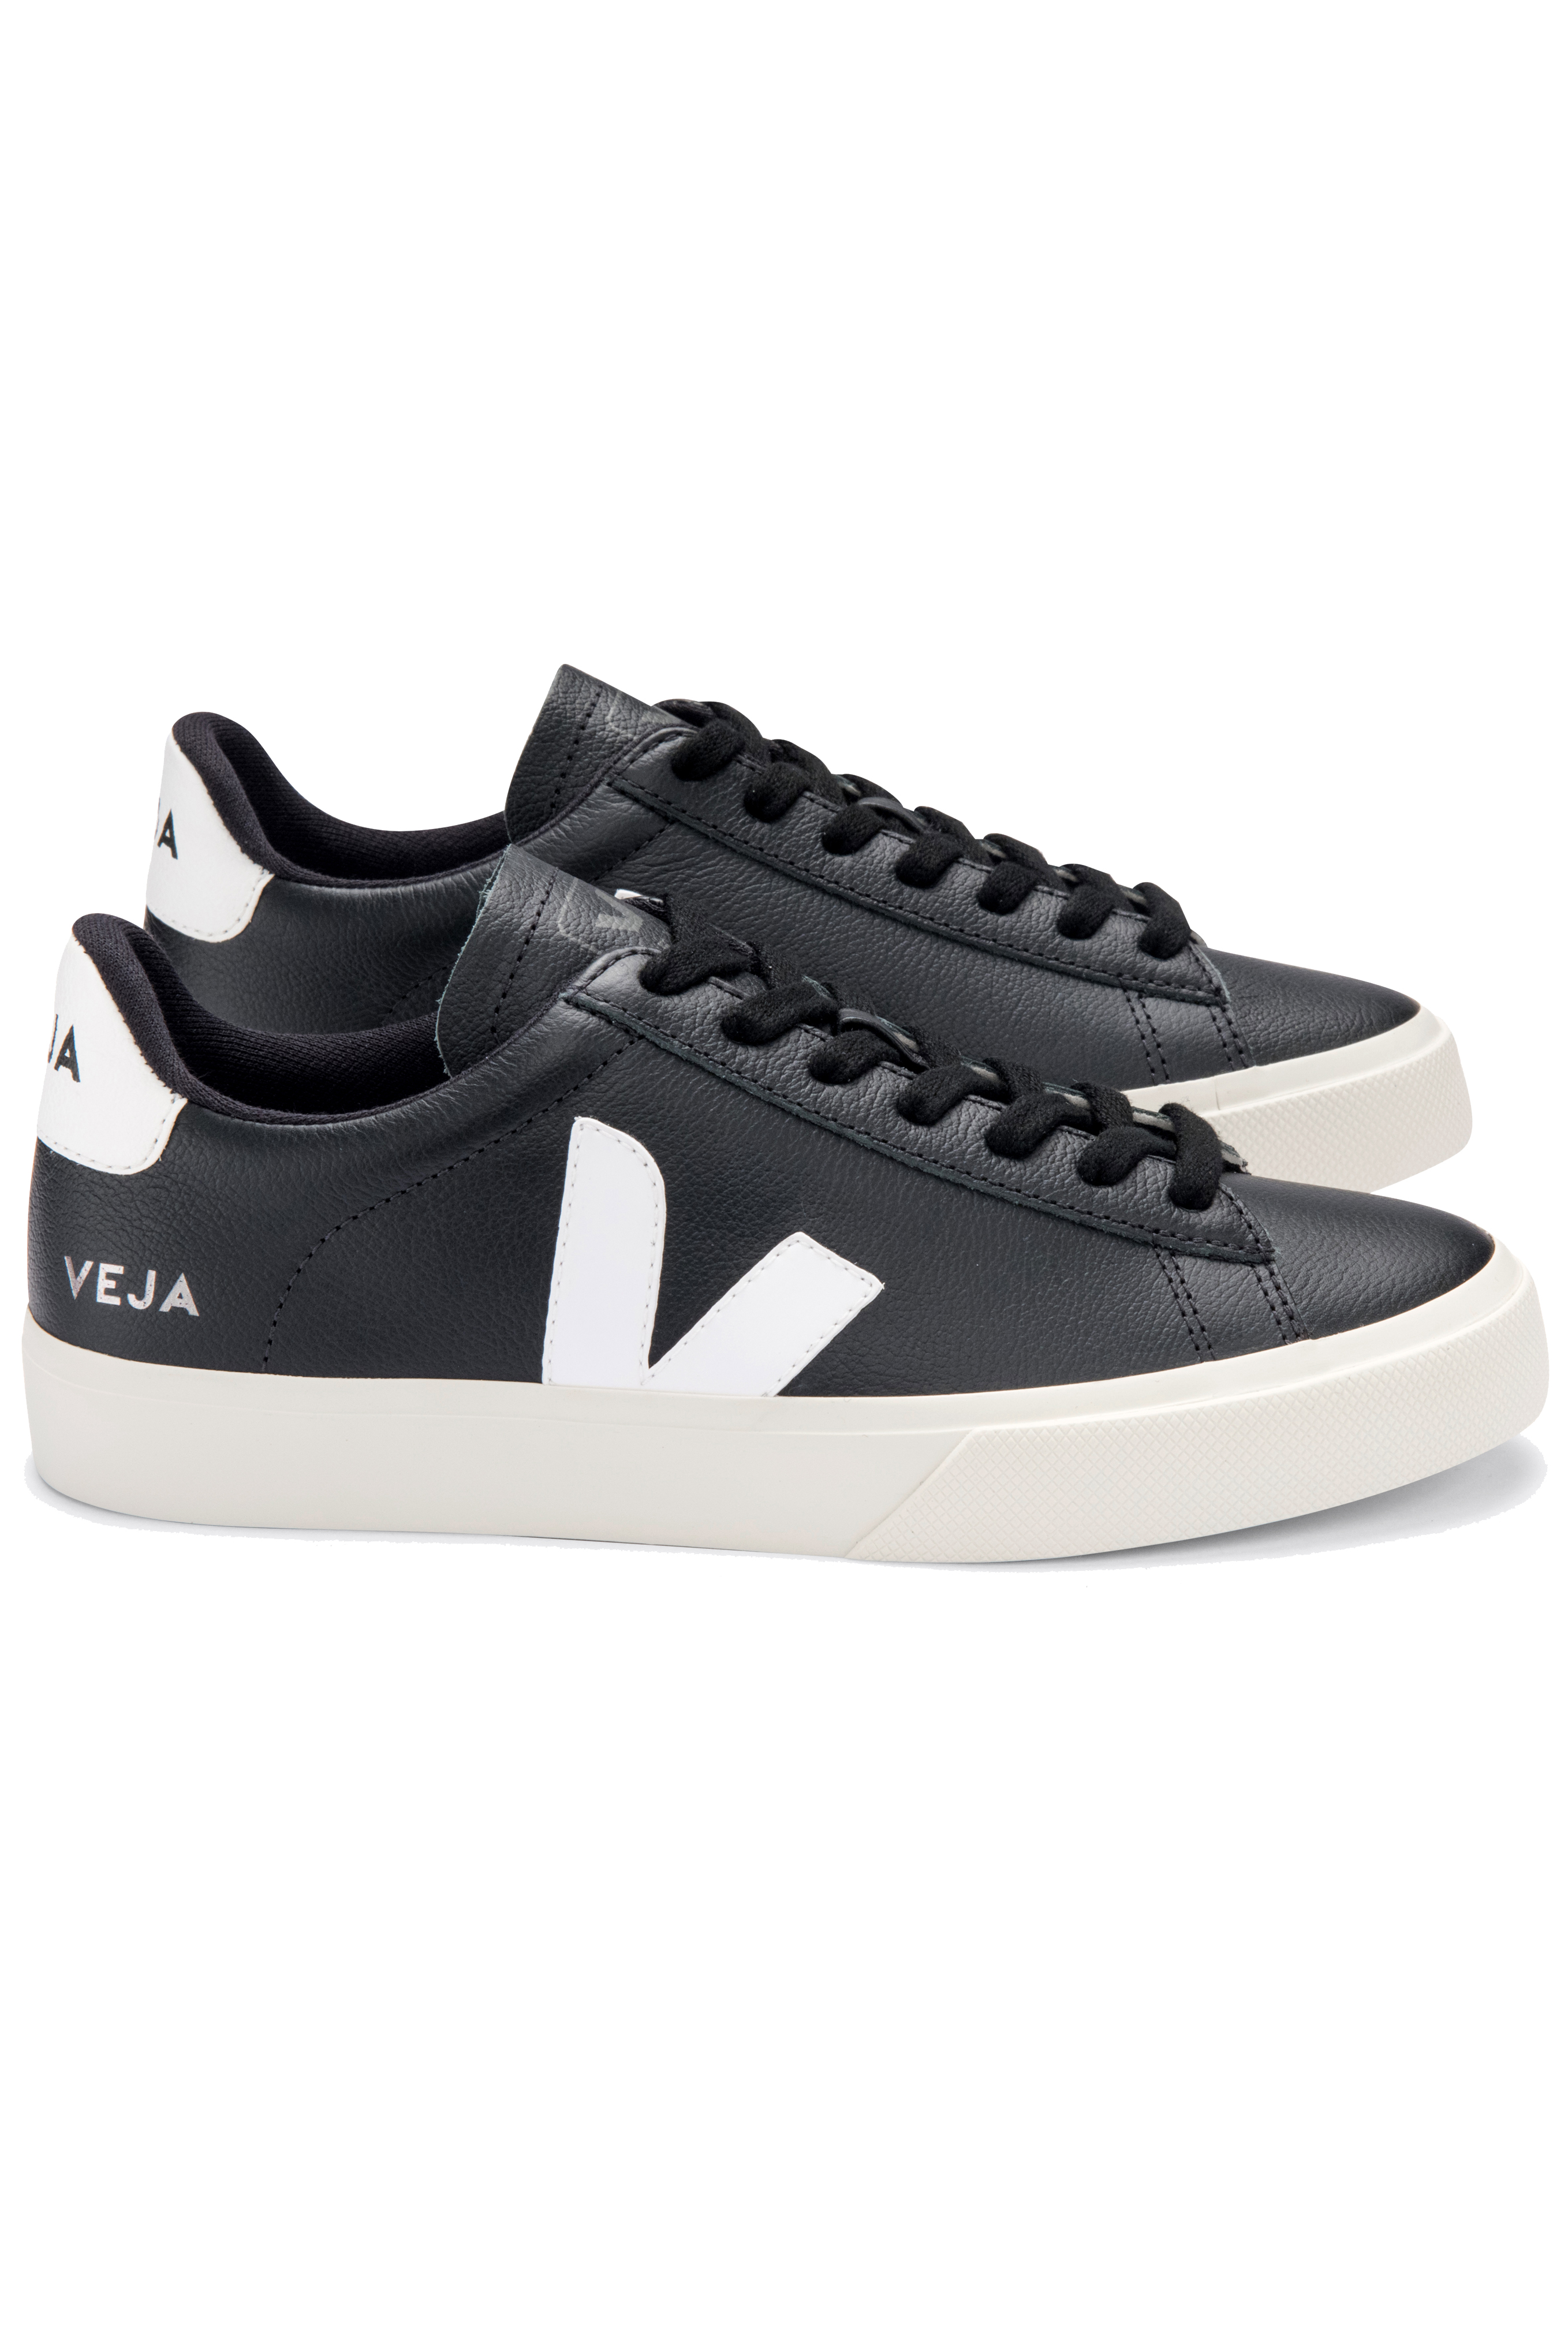 Veja Campo Chrome Free Leather Trainers Shoes - Black White